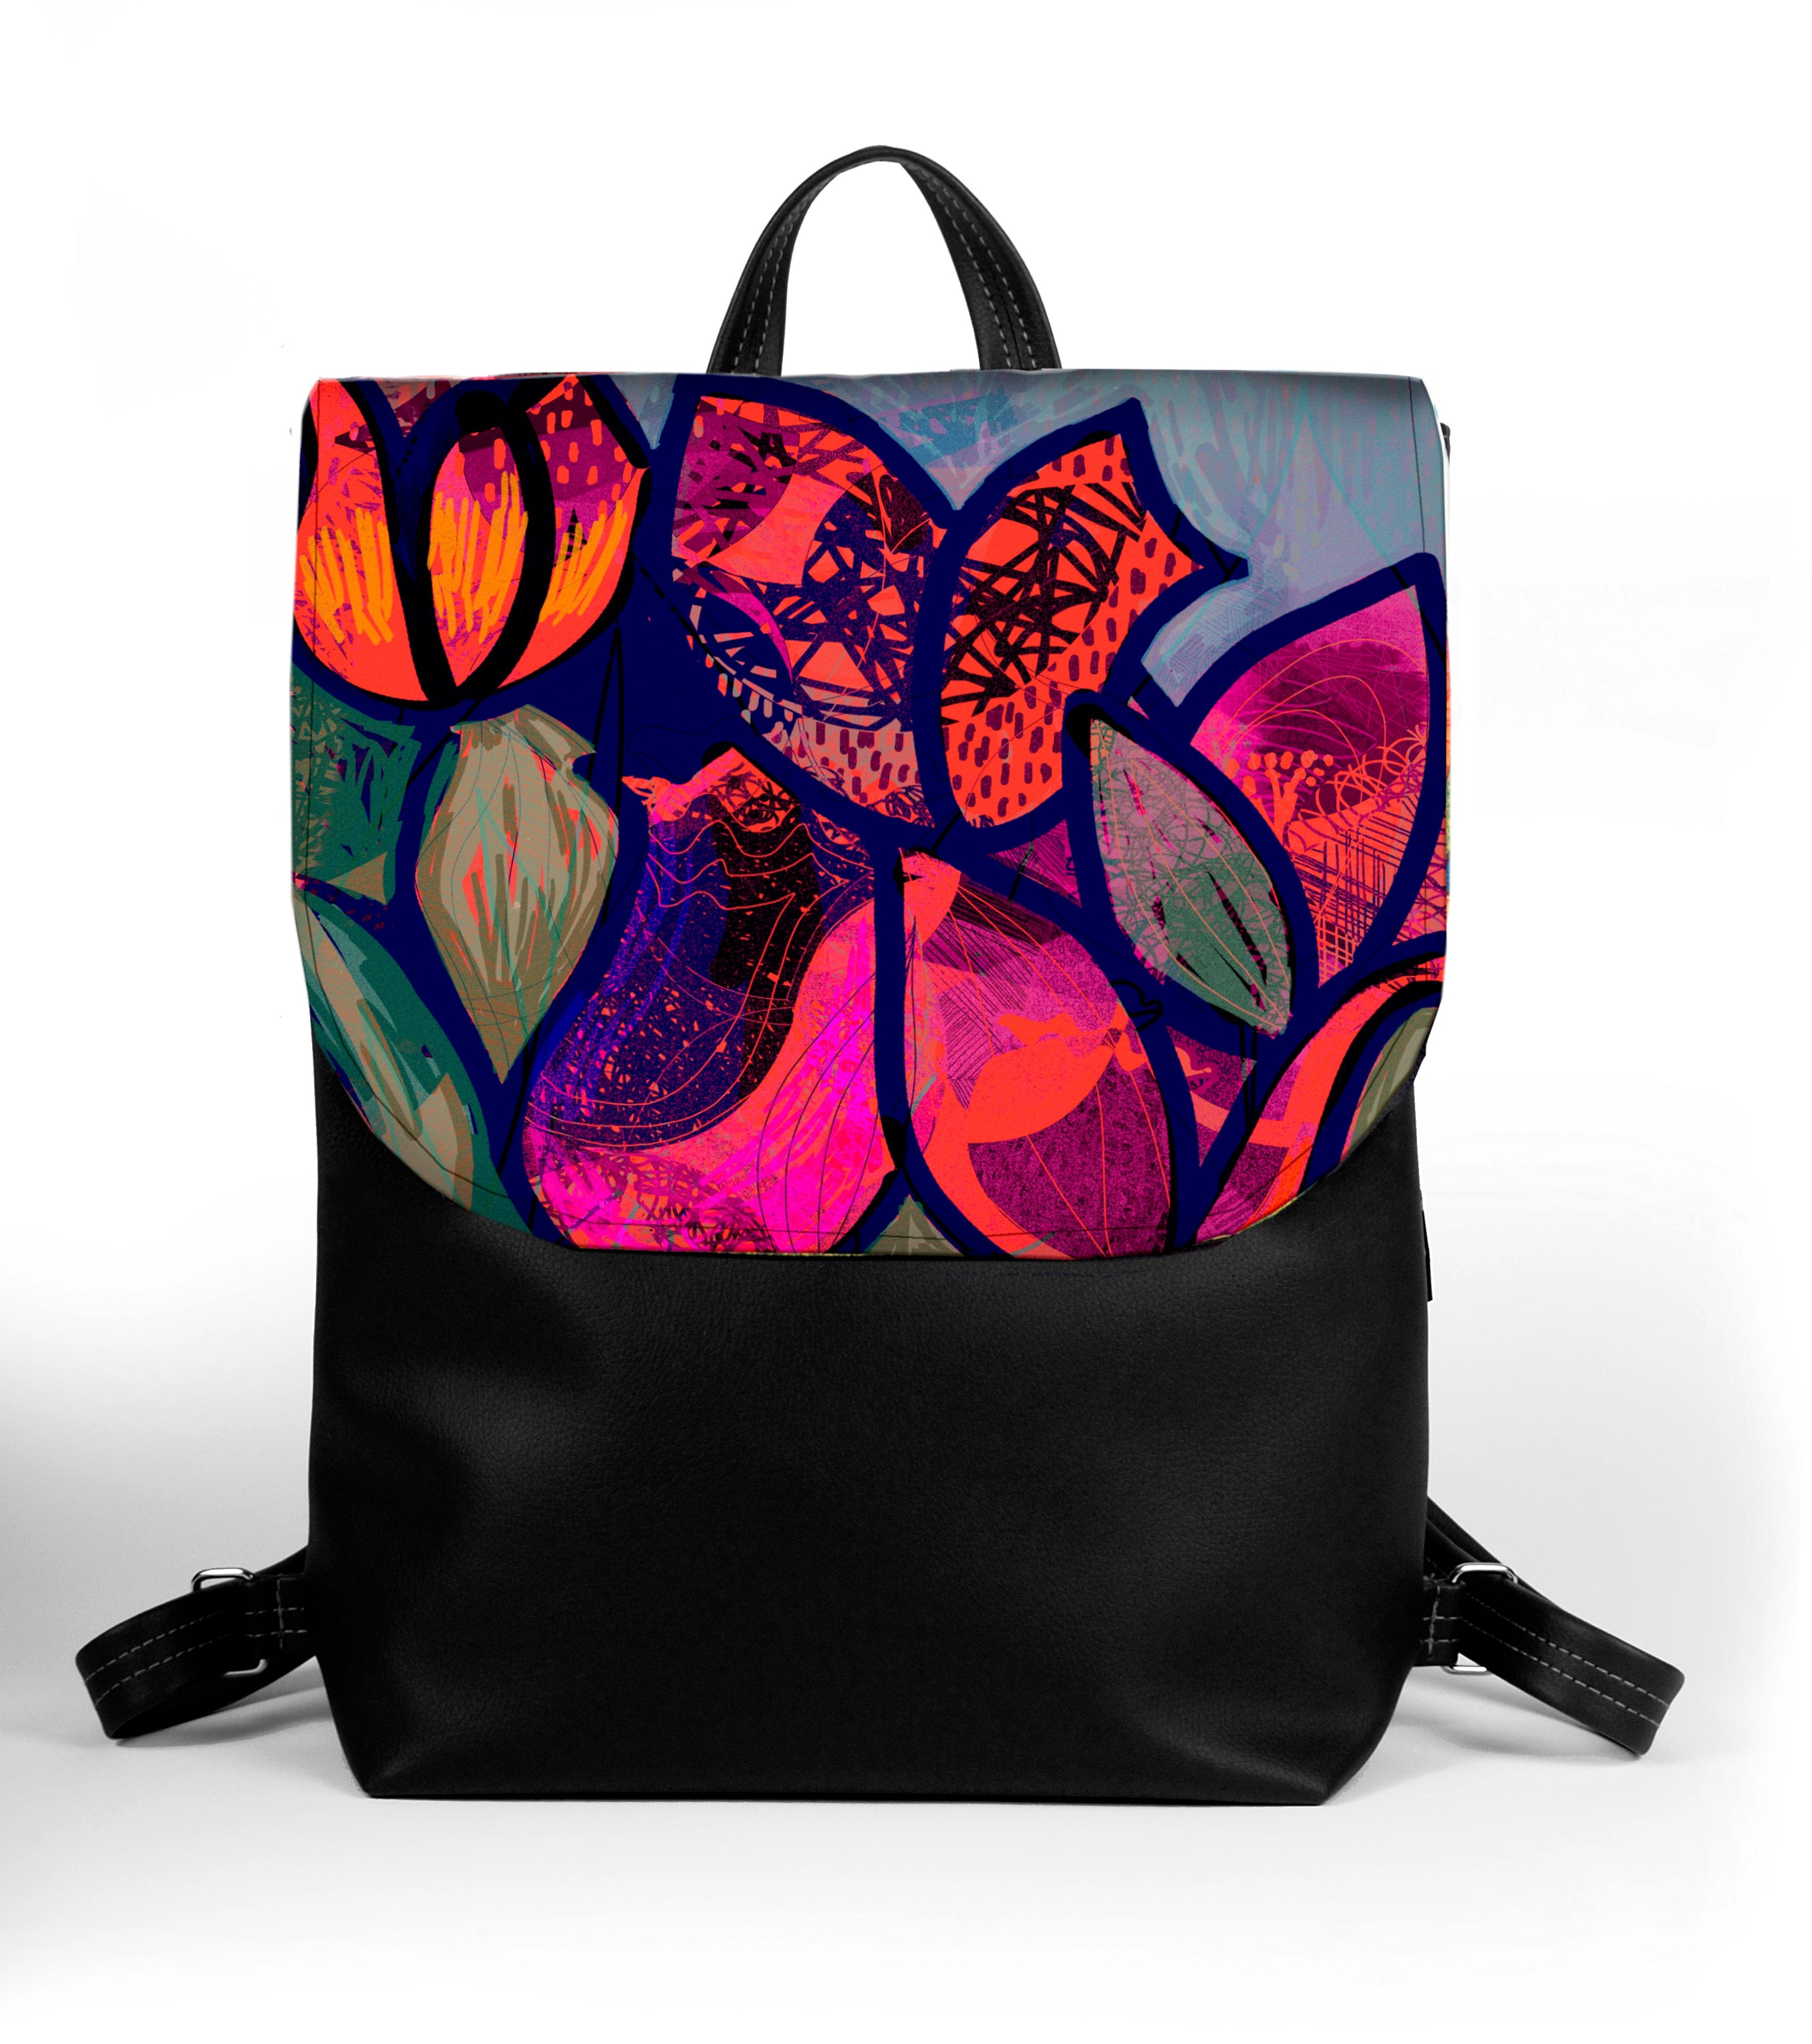 Bardo backpack large - Garden - Premium backpack large from BARDO ART WORKS - Just lvdark green, flowers, forest, garden, gift, handemade, nature, painted patterns, red, tablet, tulip, urban style, vegan leather, woman89.00! Shop now at BARDO ART WORKS